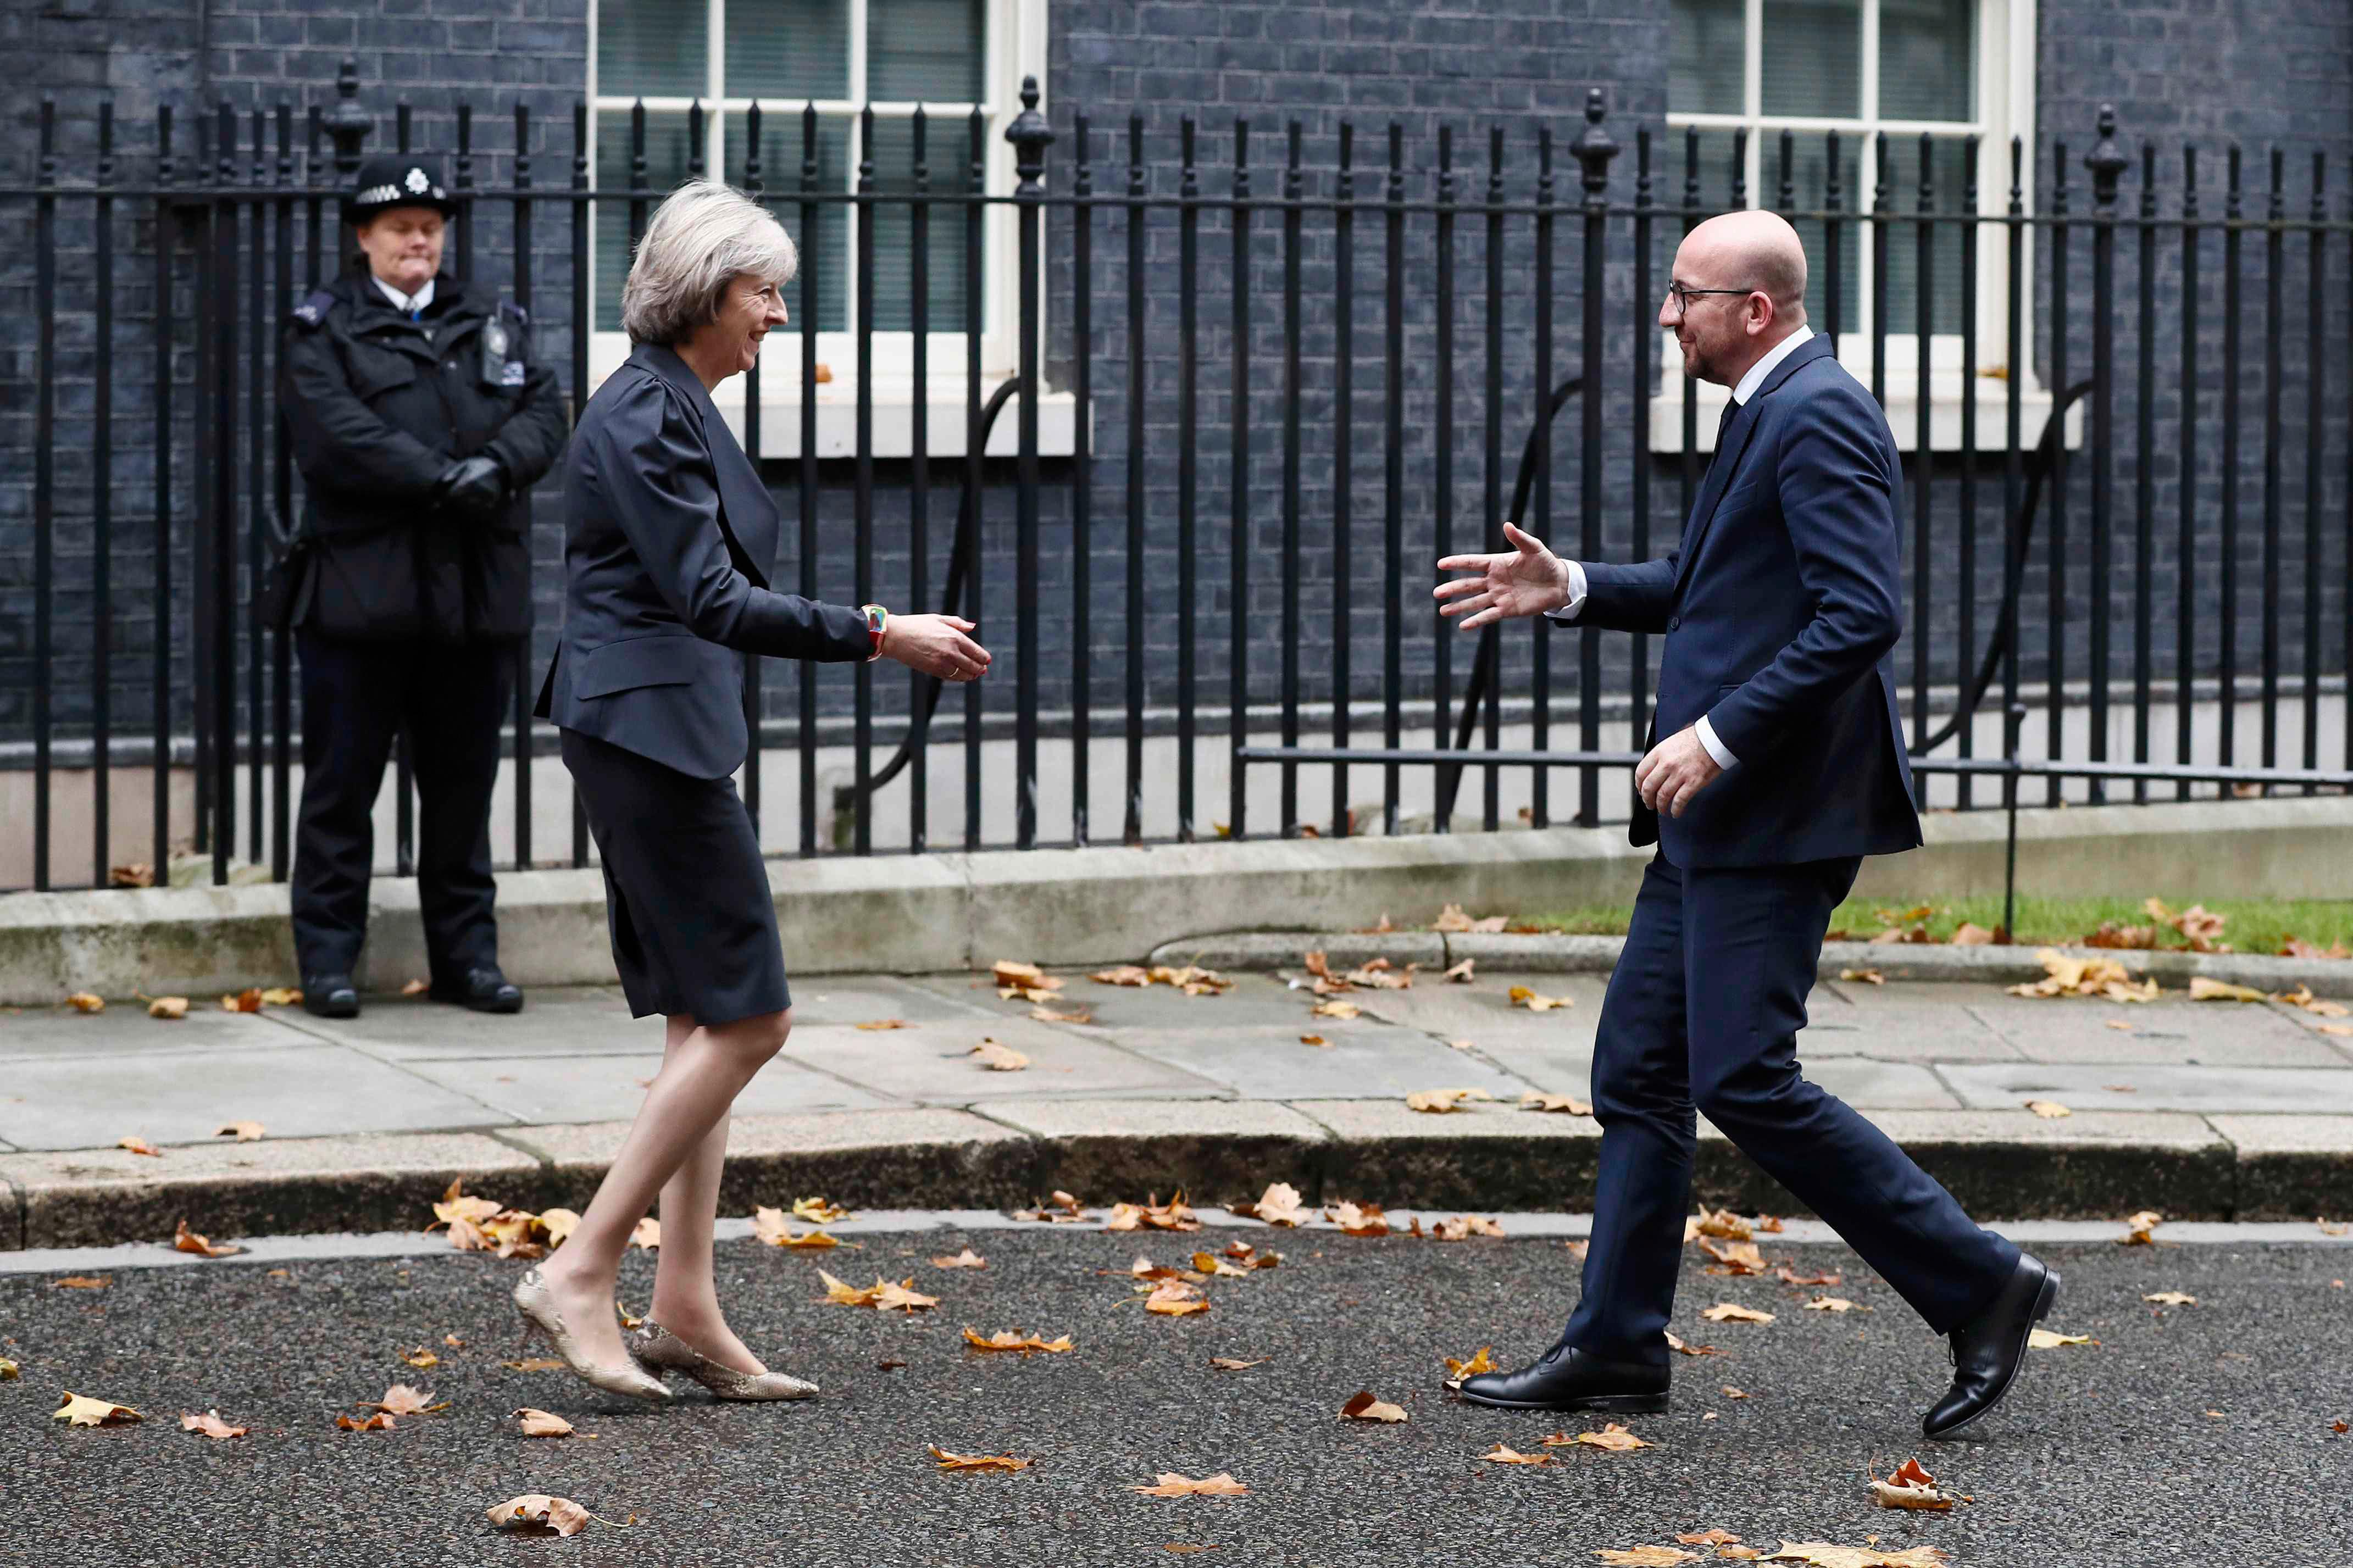 Britain's Prime Minister May greets Belgian Prime Minister Michel at Downing Street in London